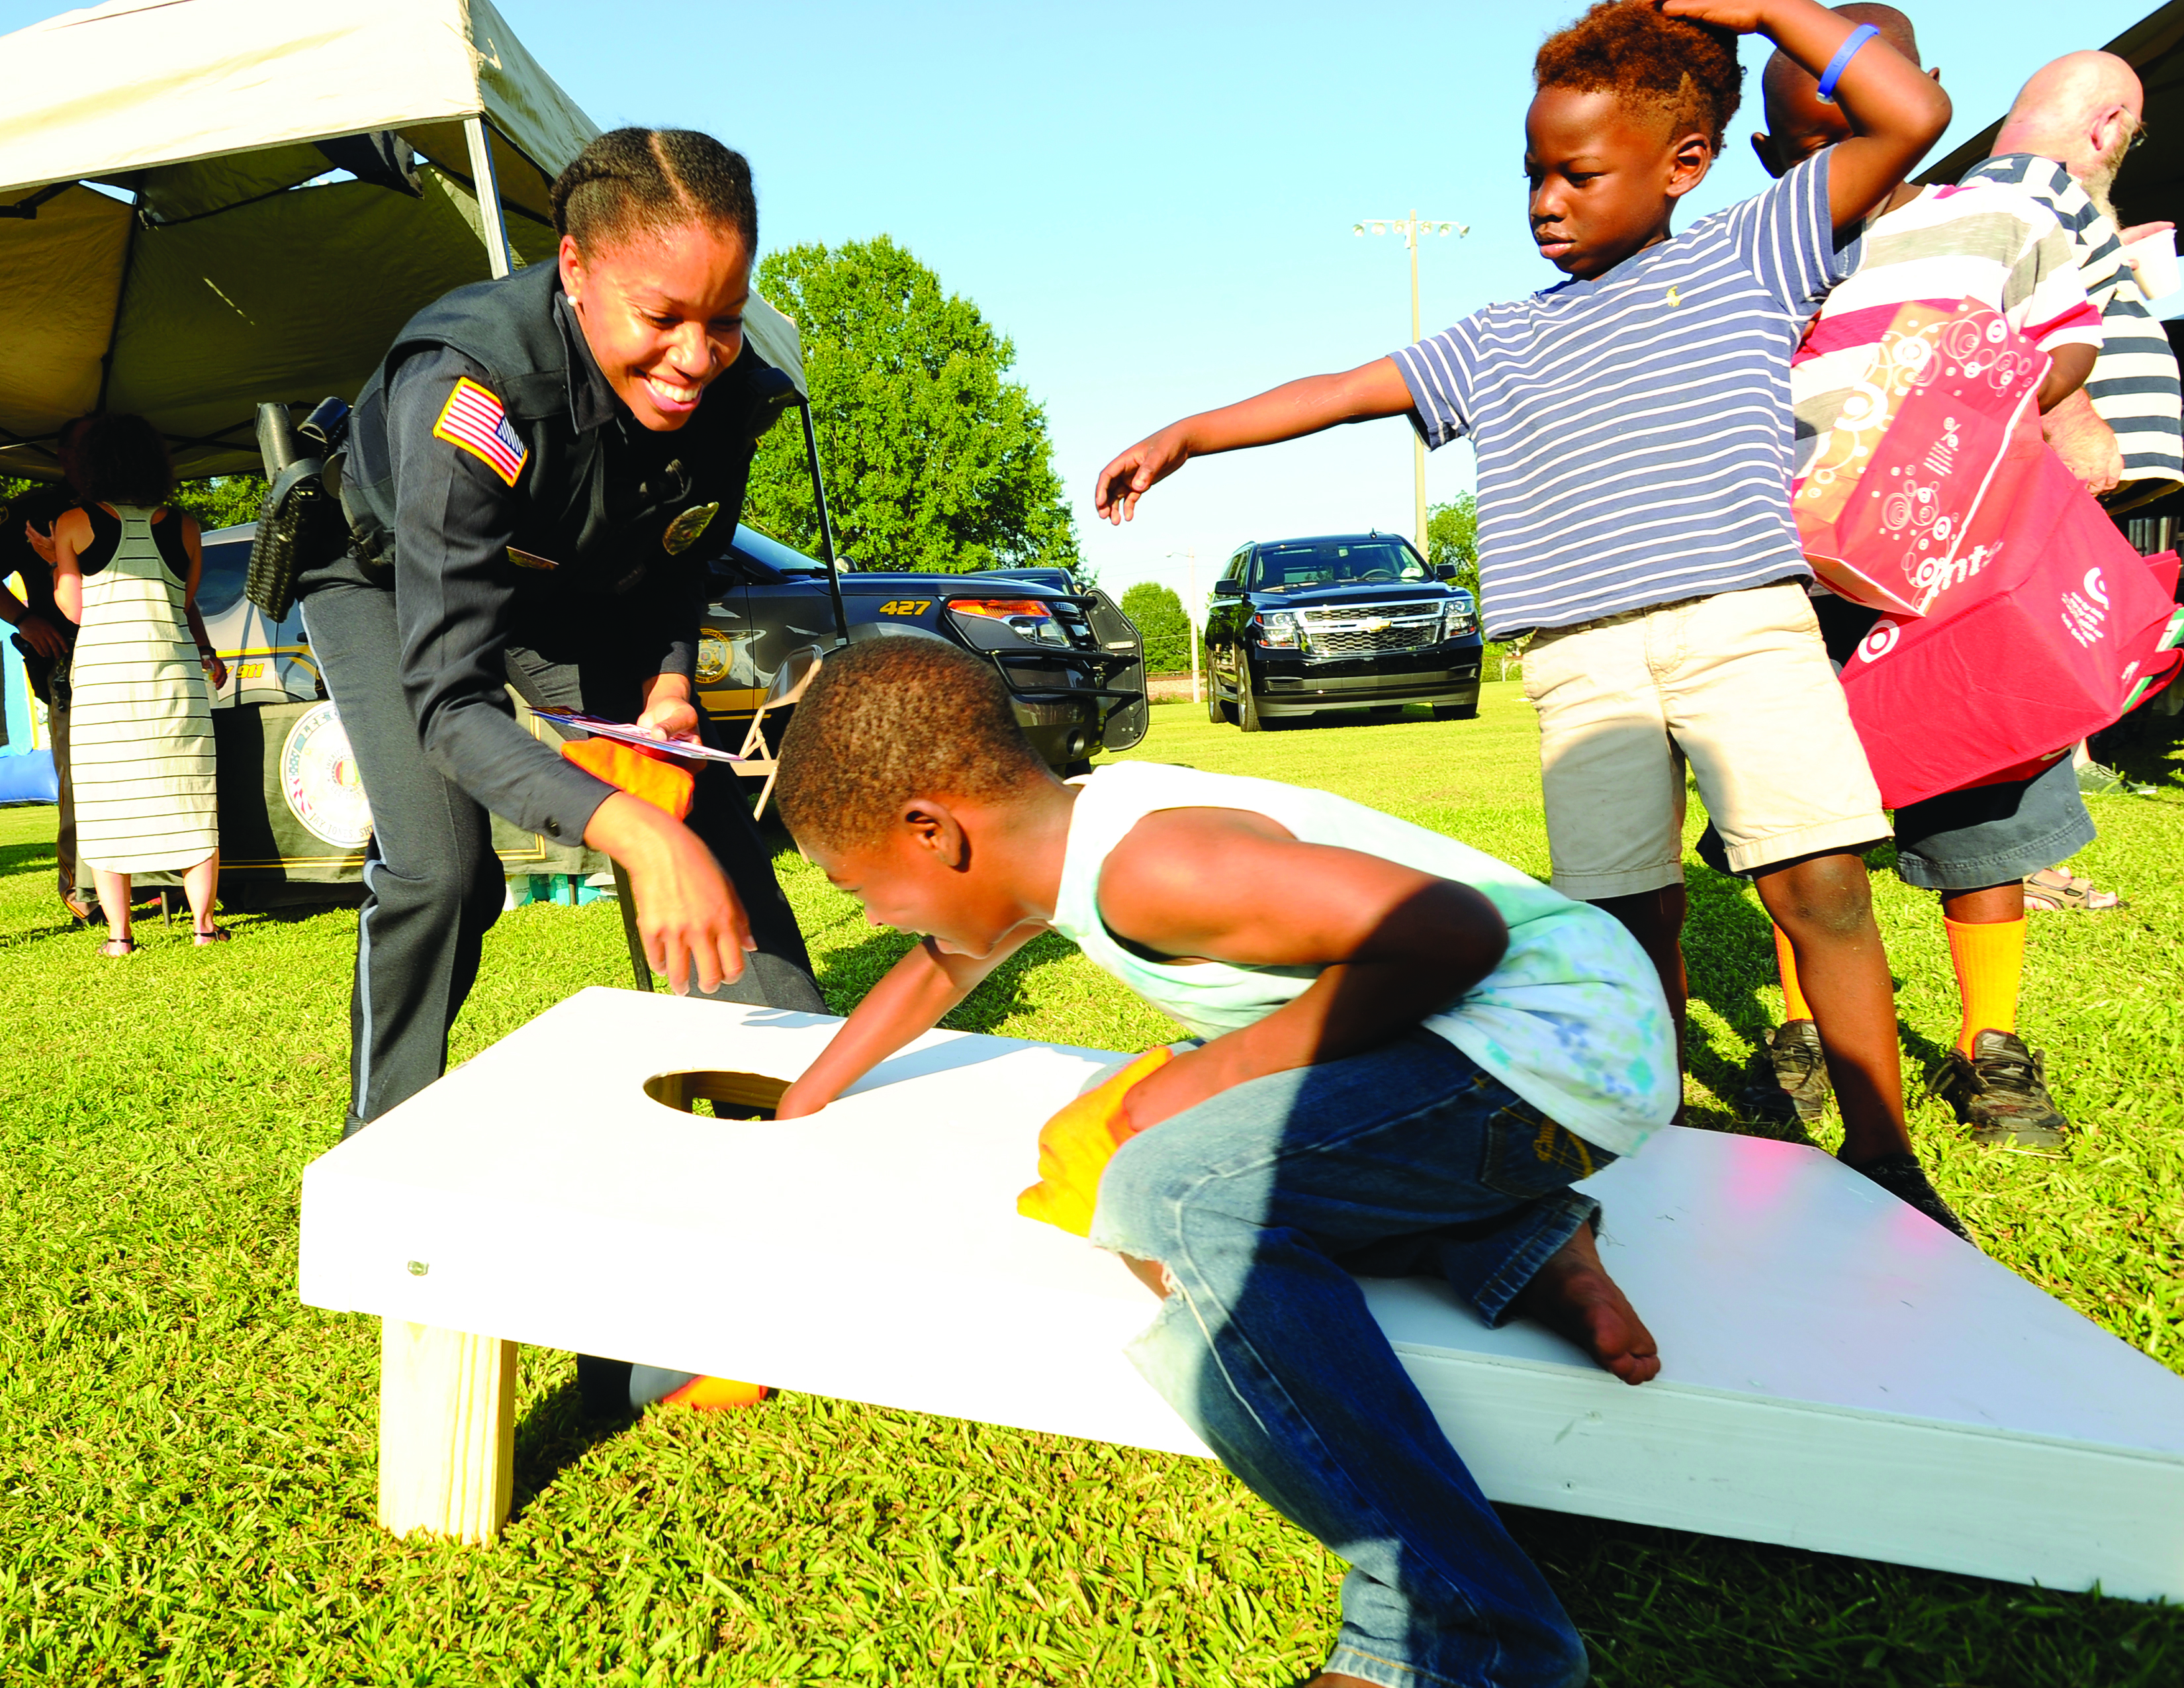 National Night Out event Aug. 6 to spread messages of love, togetherness in Opelika